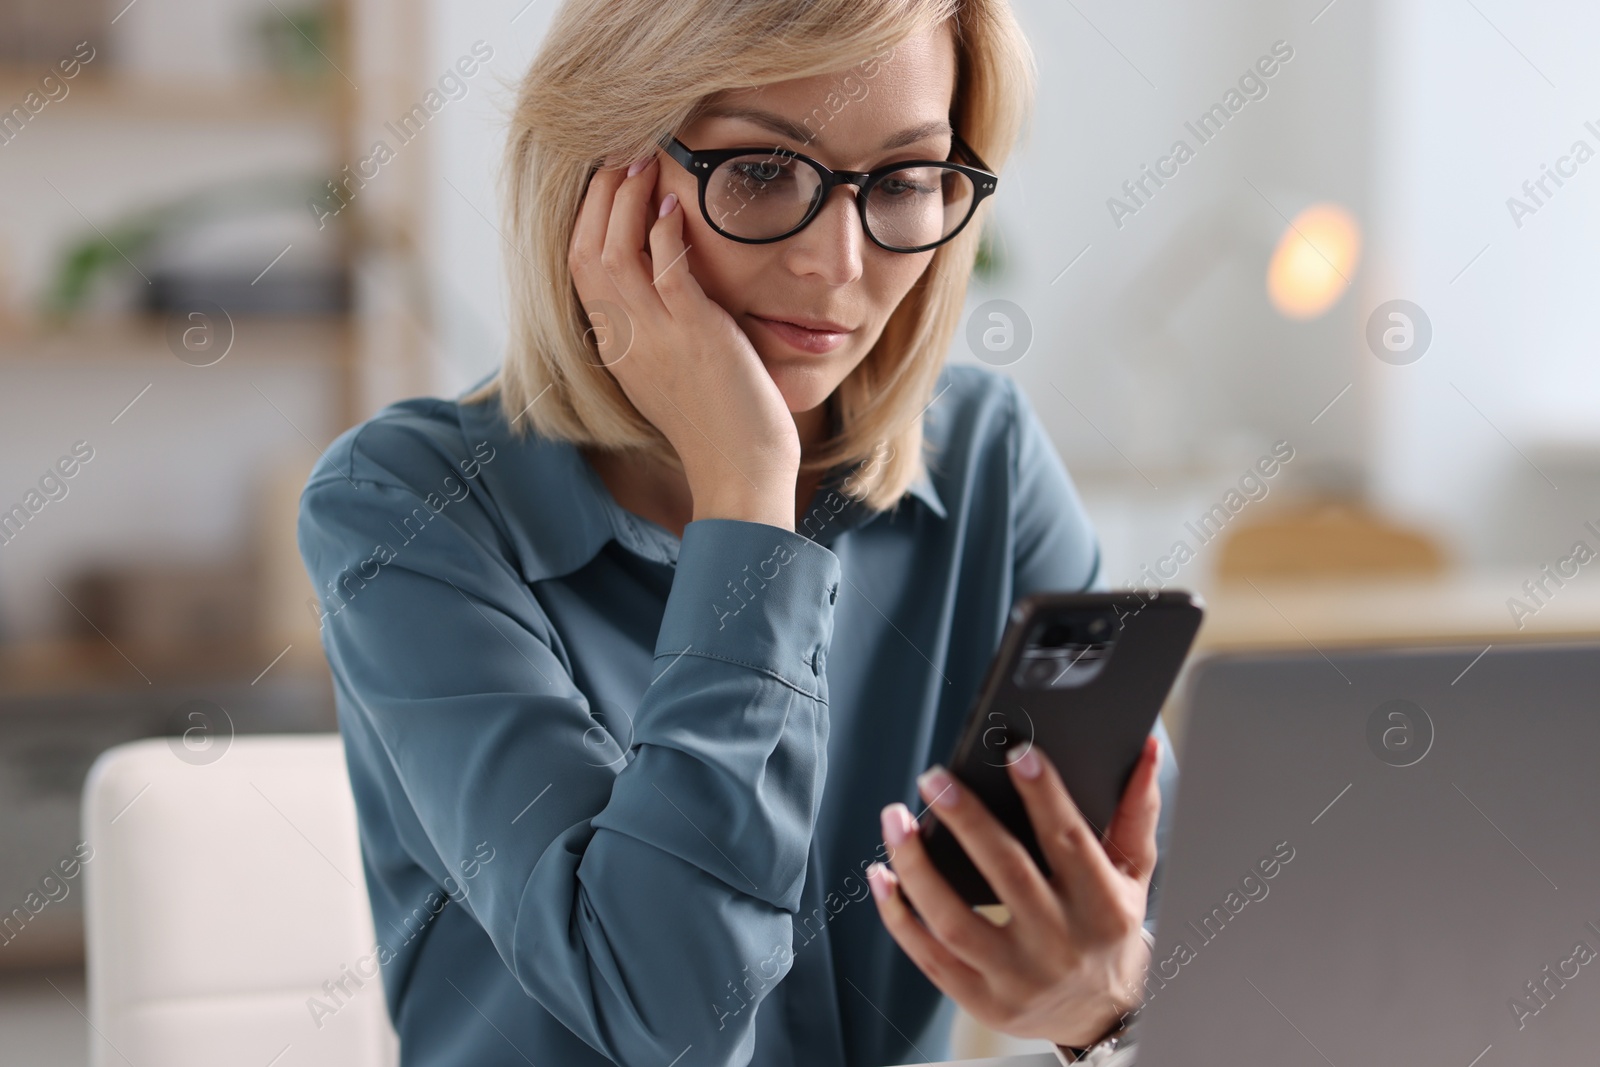 Photo of Woman using mobile phone at table indoors